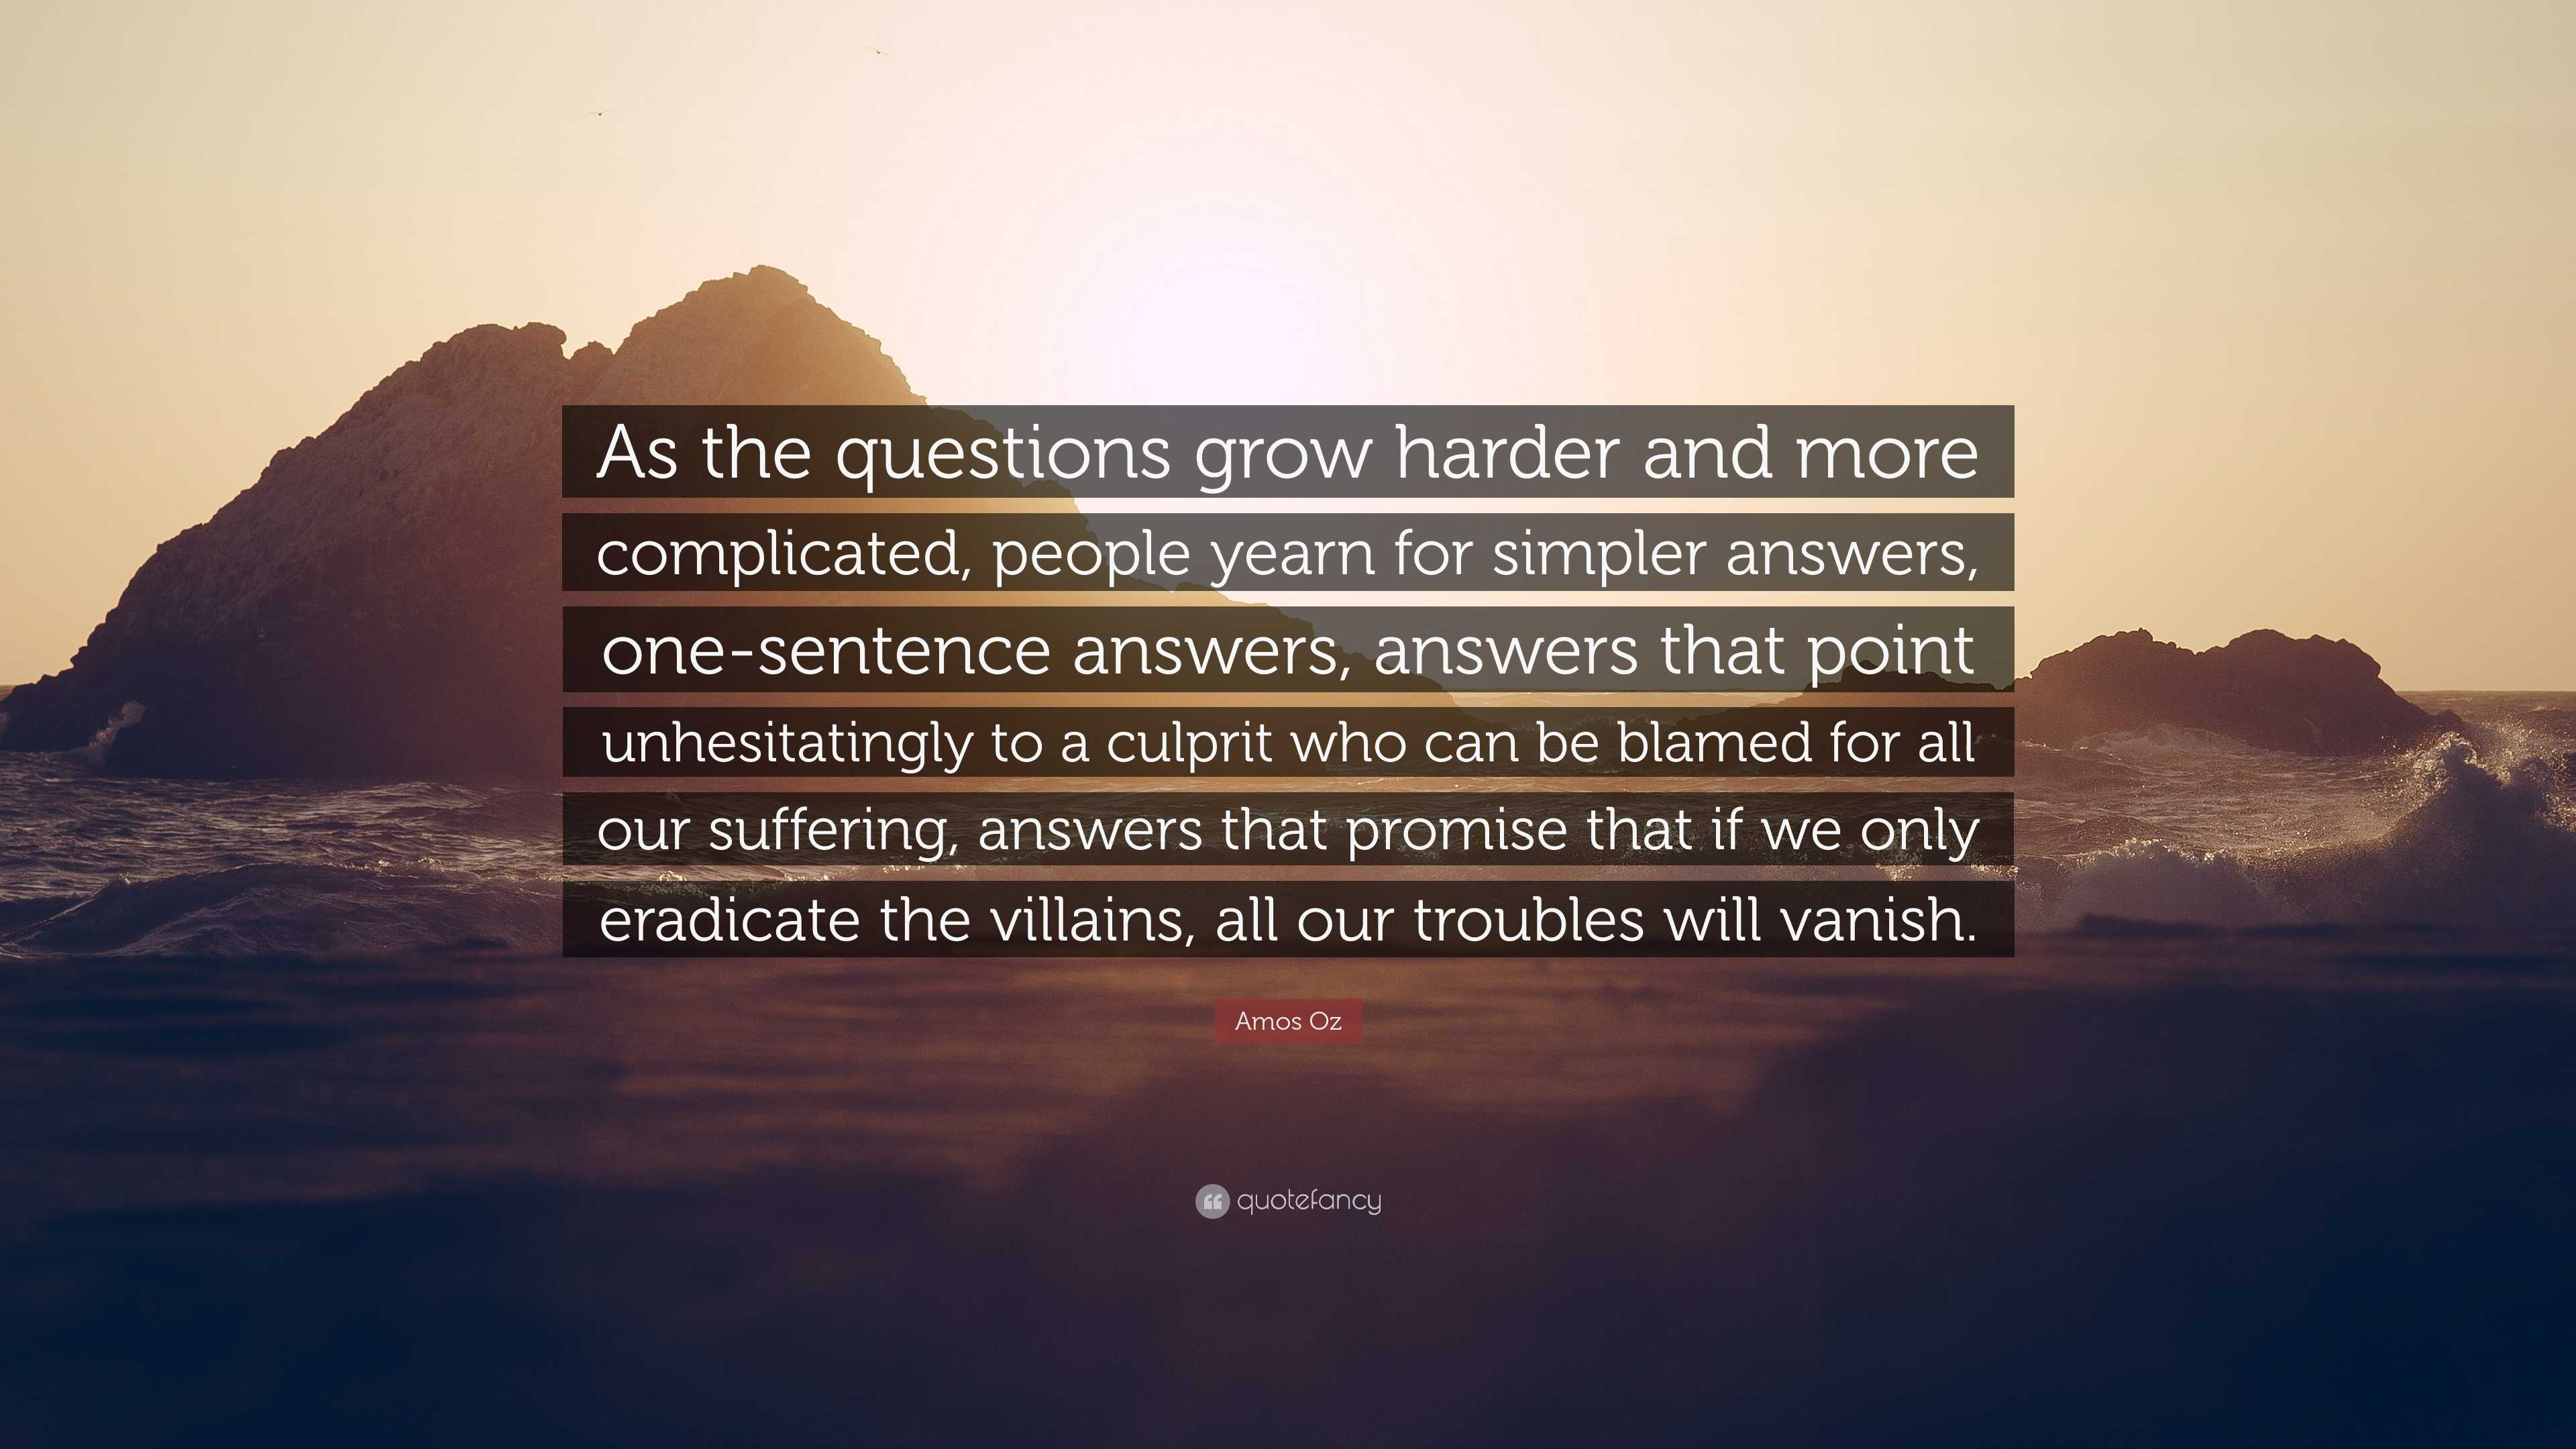 Amos Oz Quote: “As the questions grow harder and more complicated, people  yearn for simpler answers, one-sentence answers, answers that ”